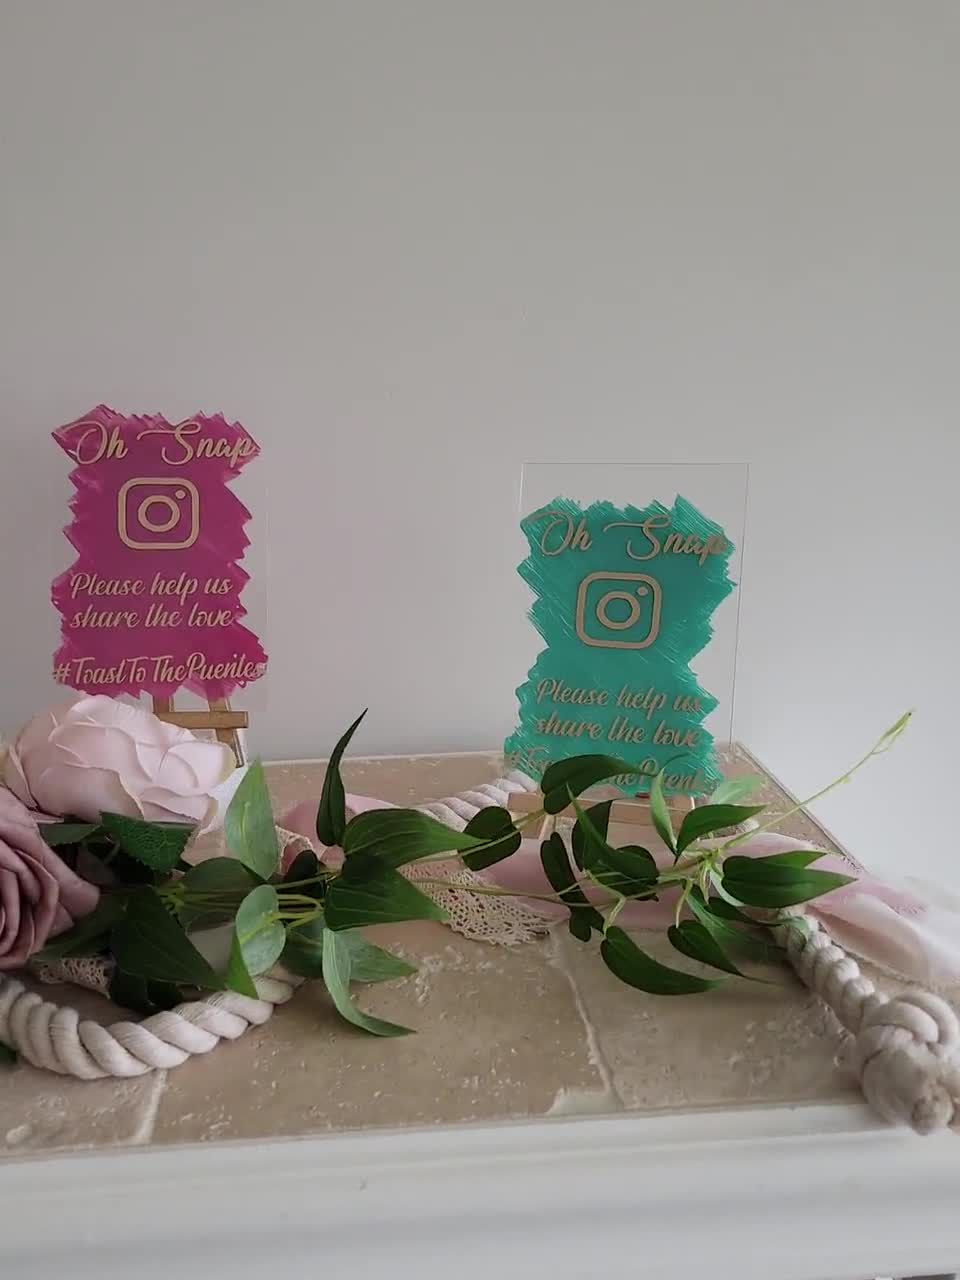 Instagram Signs "Oh Snaps" Wedding Table Decorations pack of 5 